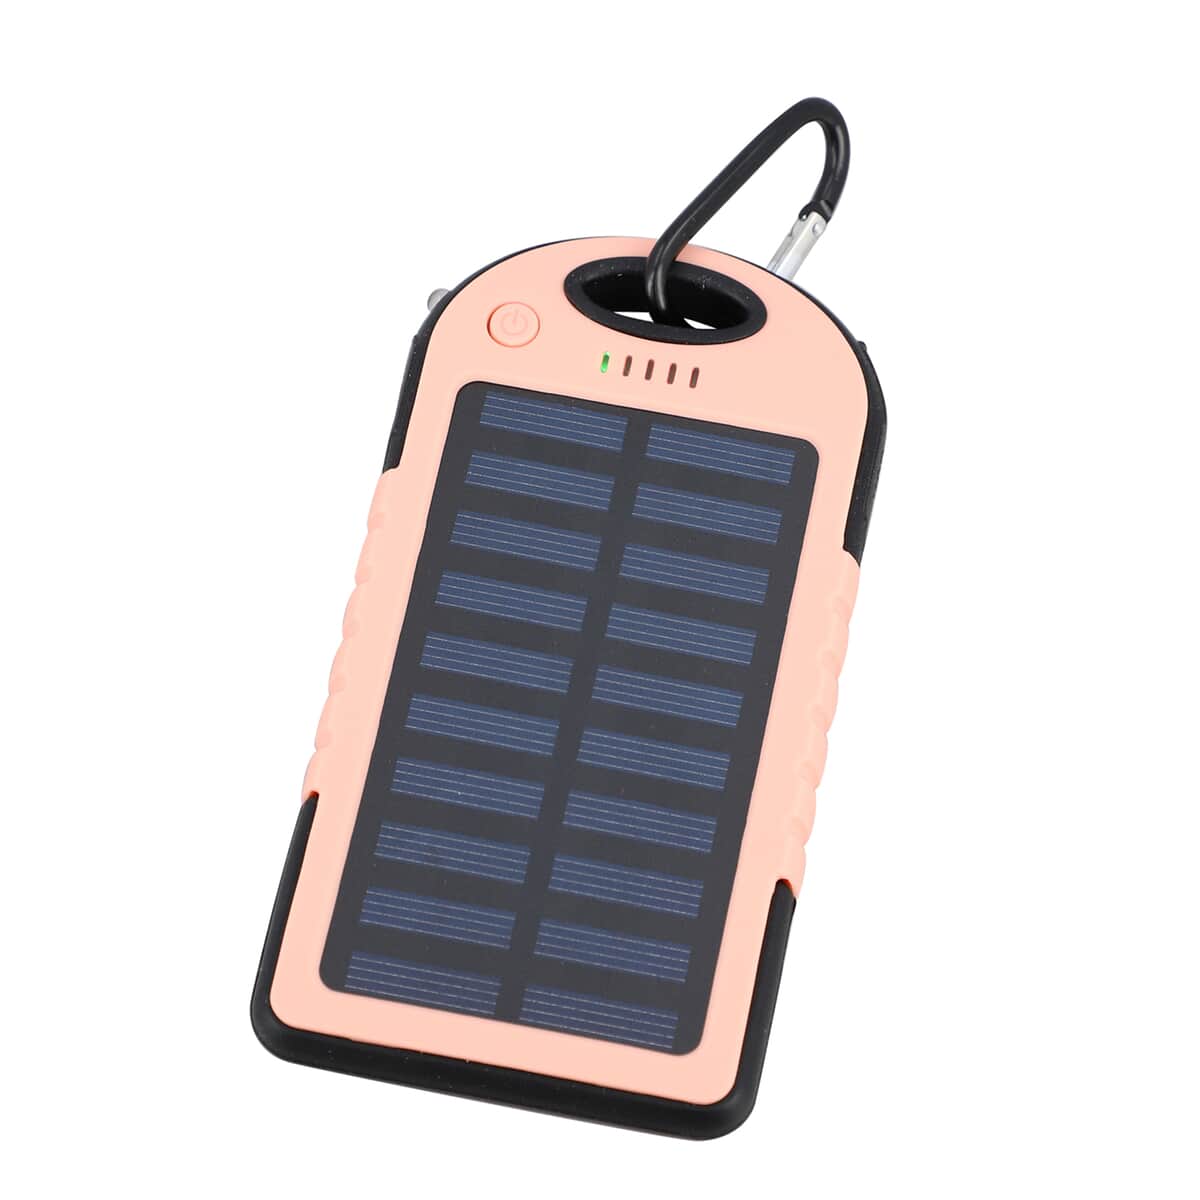 Homesmart Blush Carabiner Solar 5000 mAh Battery Charger with USB & Emergency LED Torch image number 0